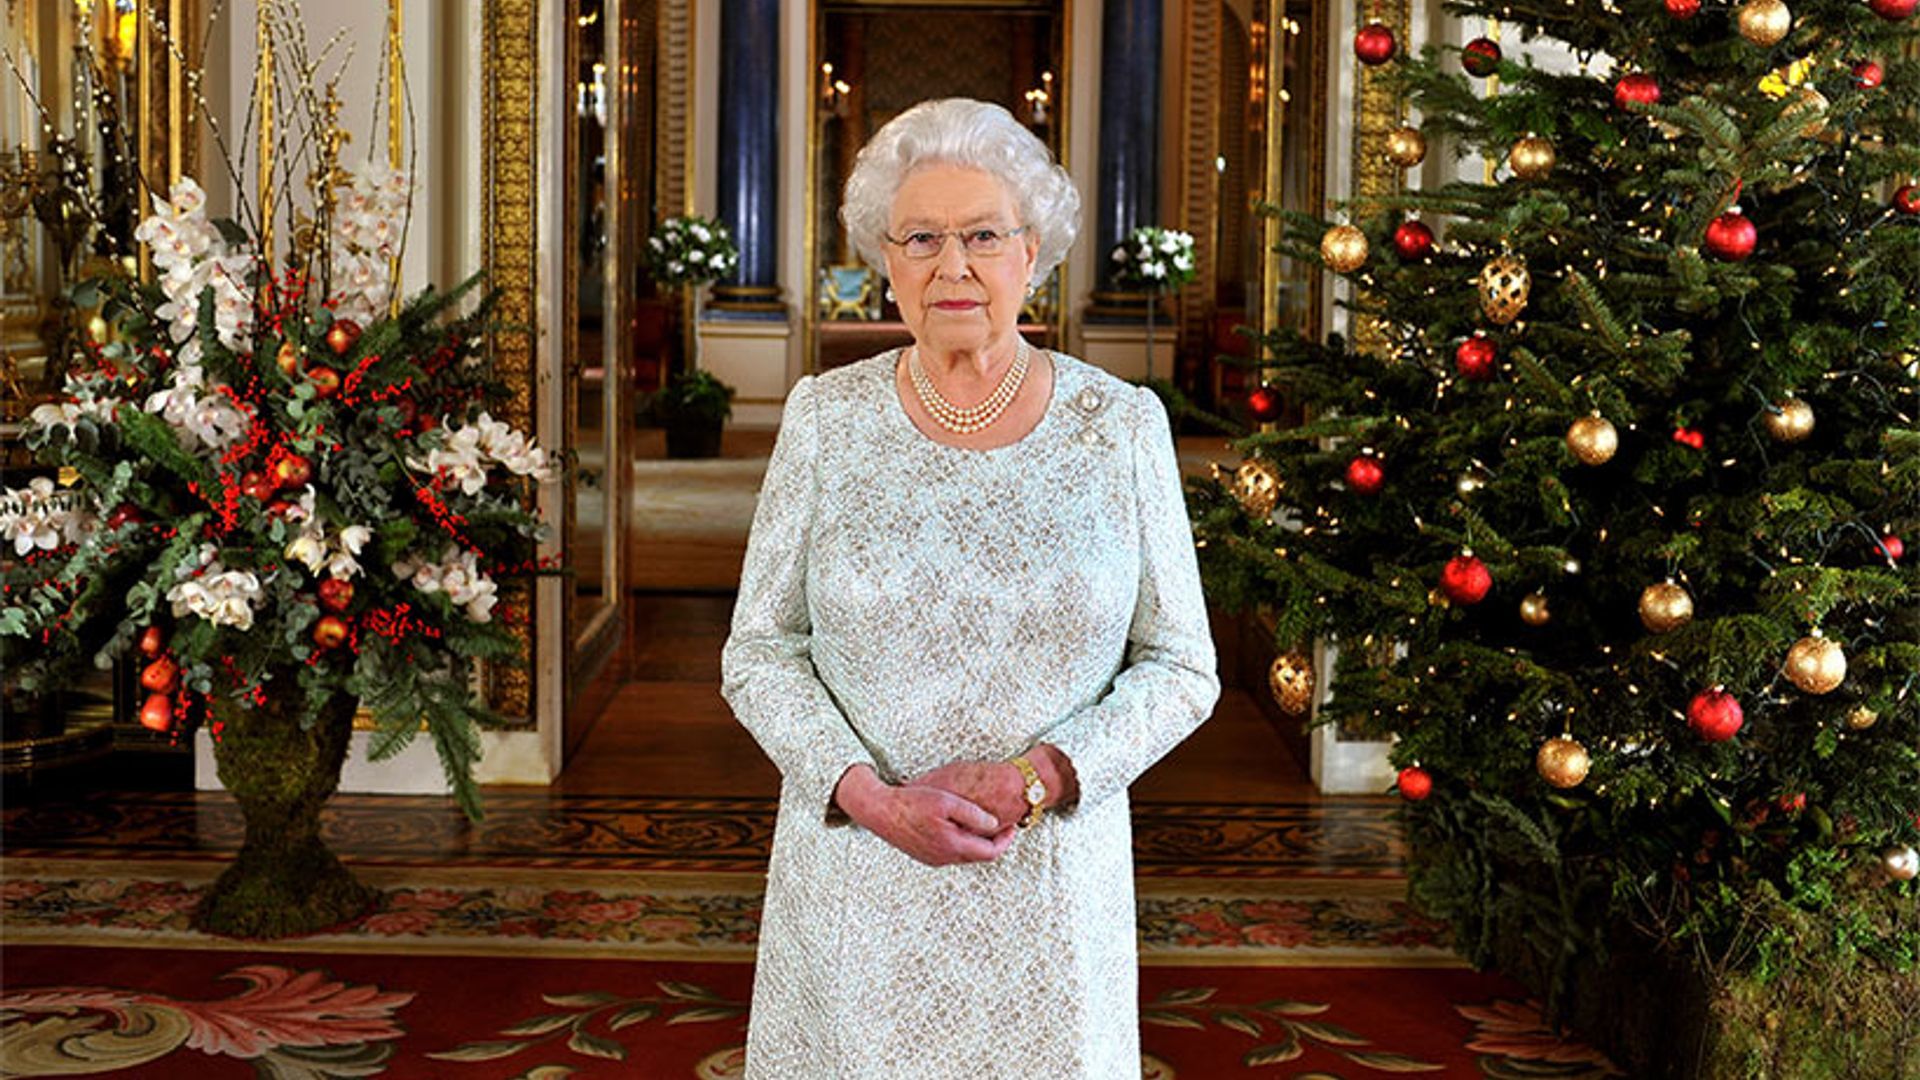 The Queen Christmas 2012